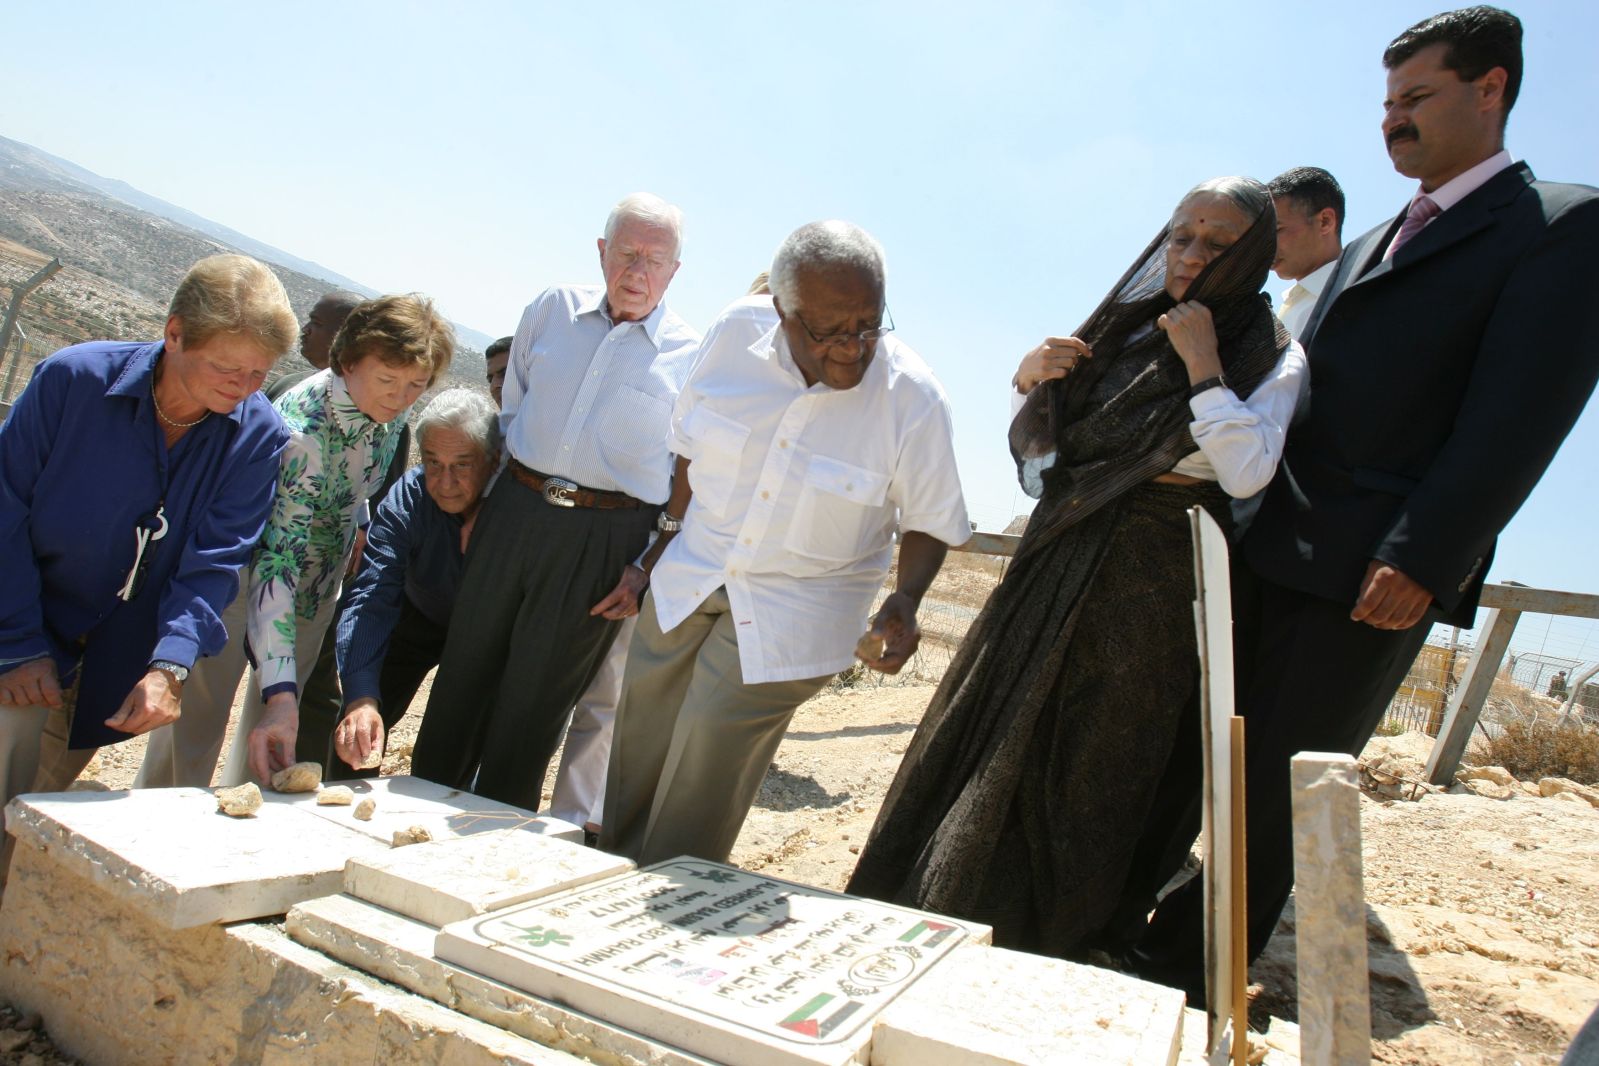 Abdallah with the Elders at a grave of a Bil'in resident shot by Israeli forces